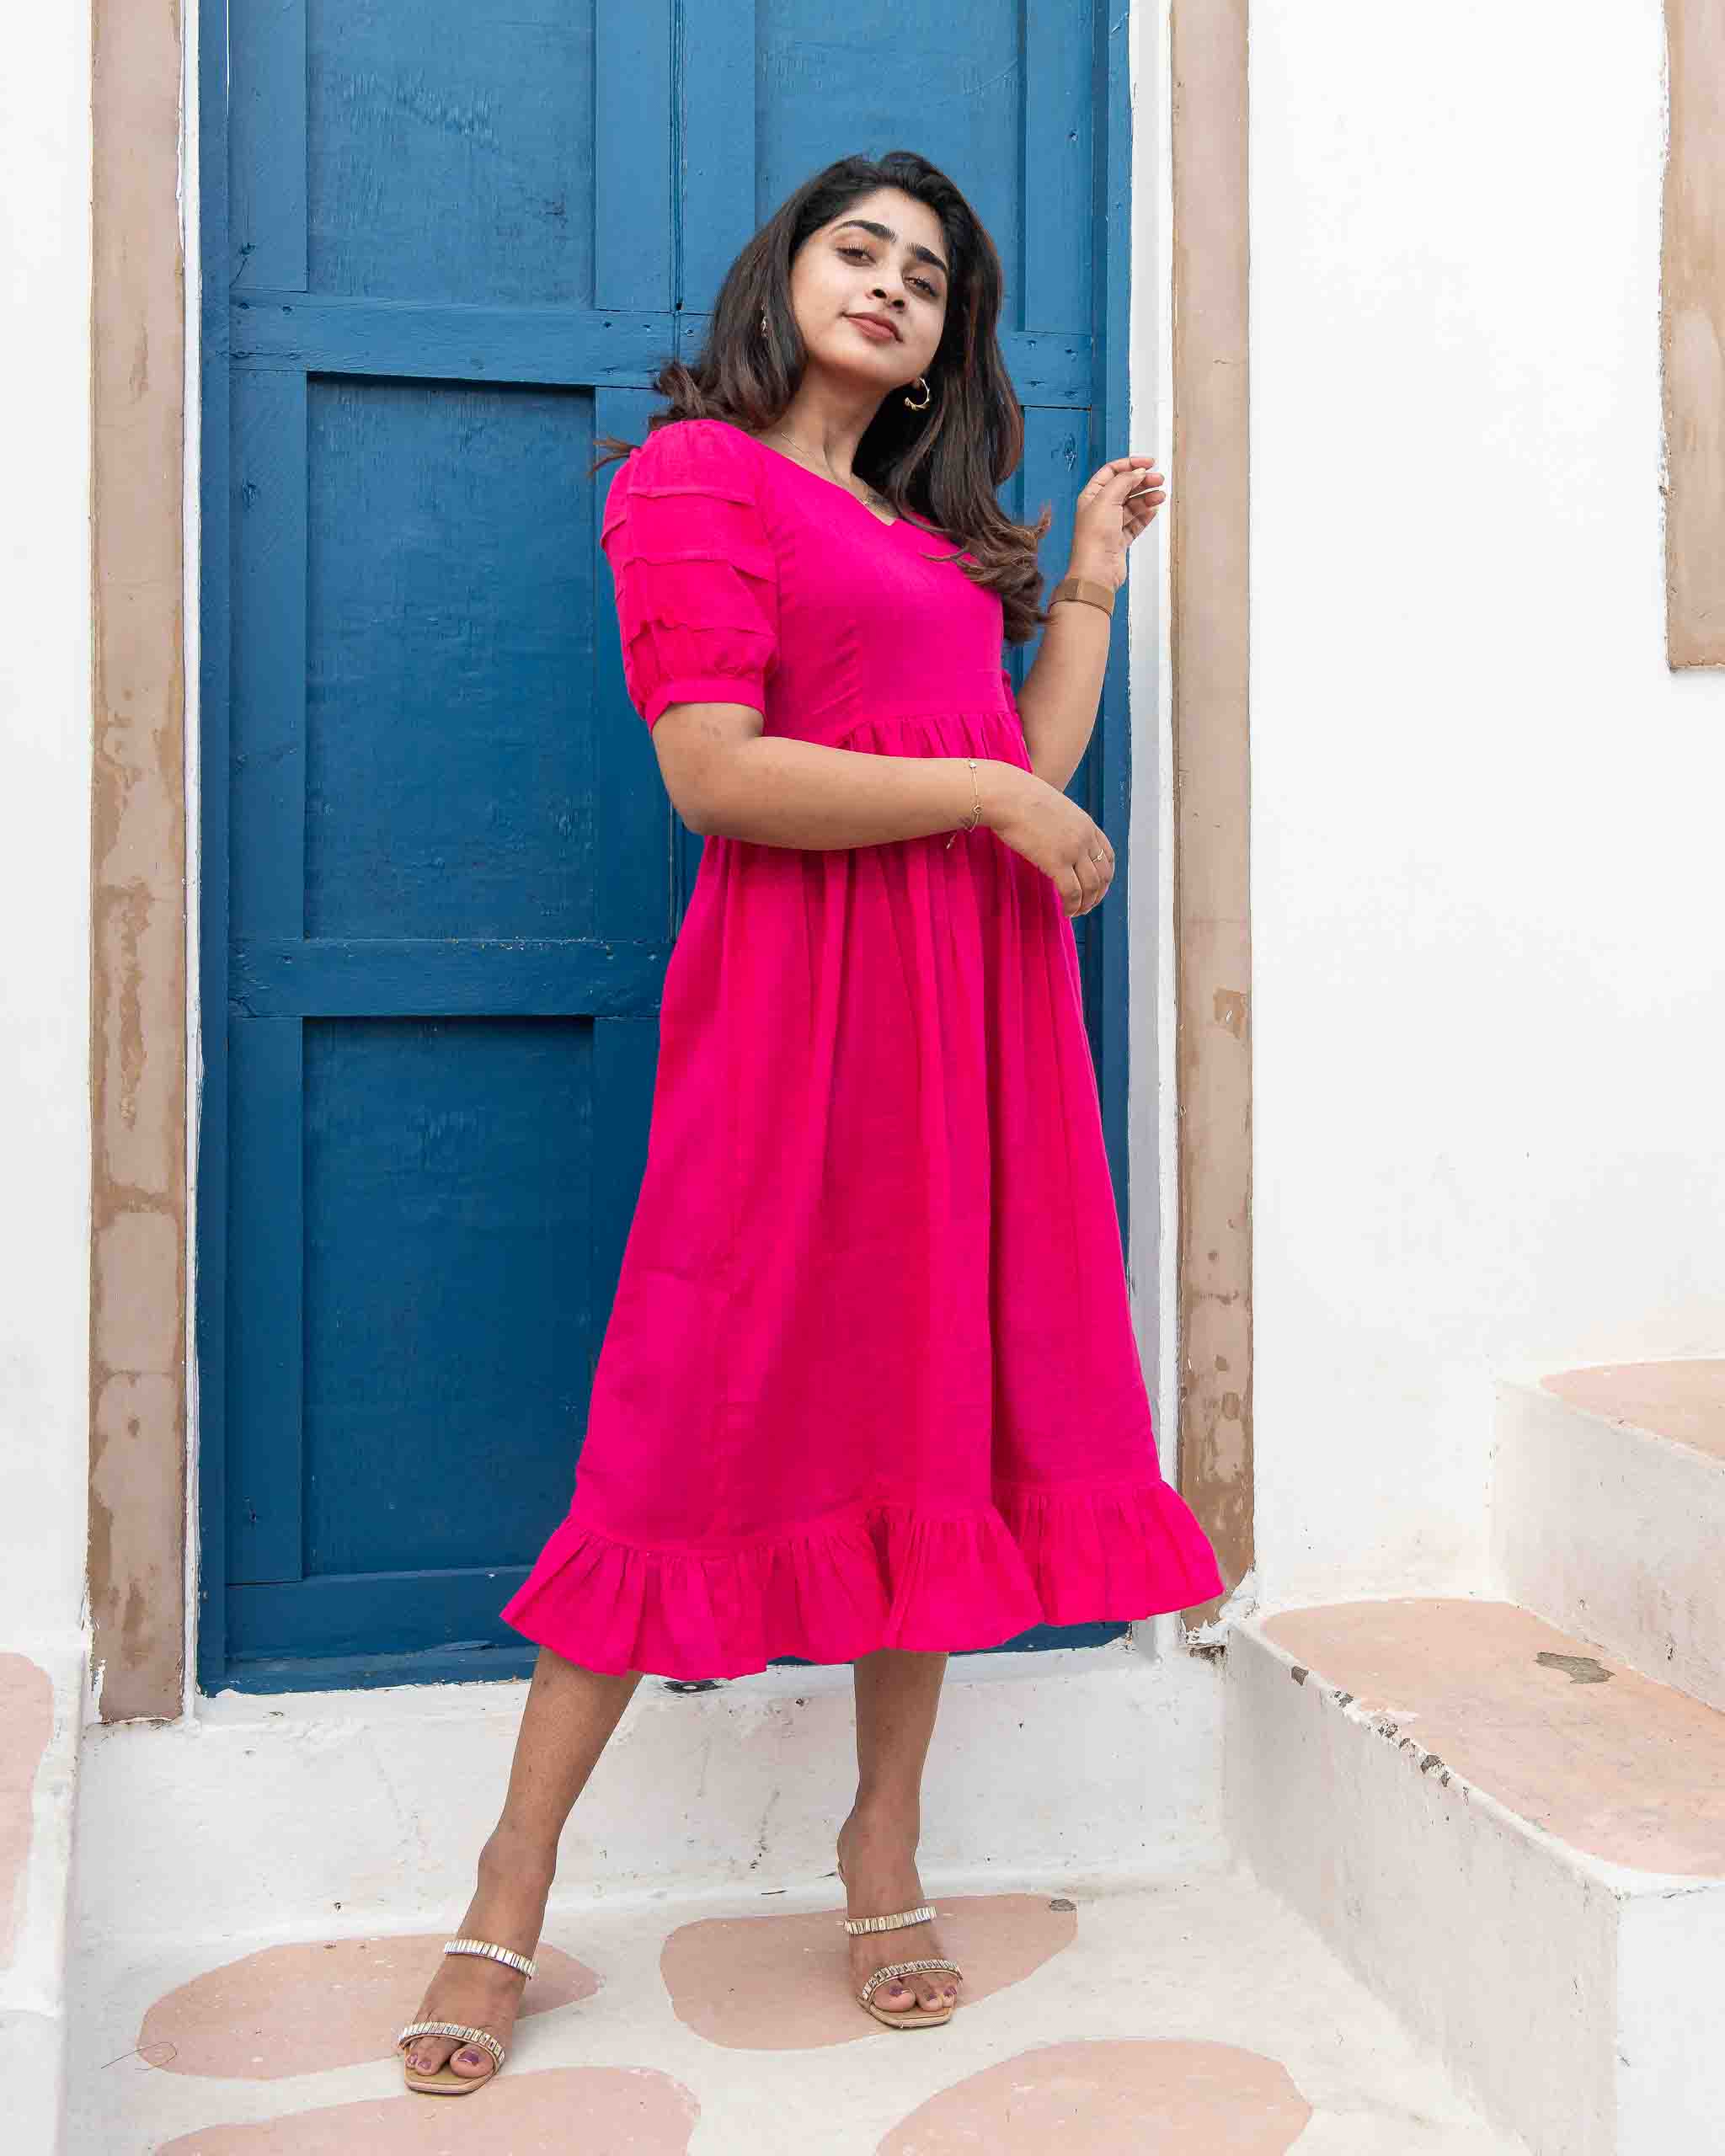 Pink Dress,Regular Use,Cute Short Dress,Cotton ,Regular Use,Comfortable, Supportive, Easy access, Functionality, Convenient, Stretchy, Soft, Breathable, Durable, Adjustable, Stylish, Flattering, Practical,